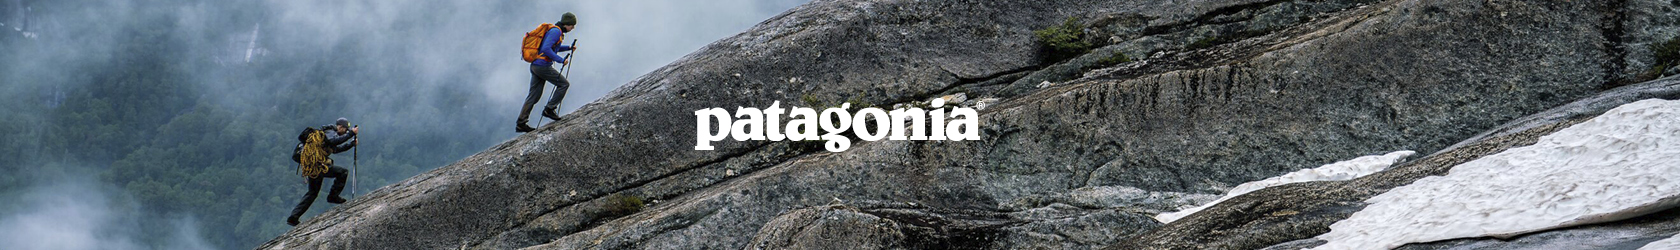 Two people are walking up a rocky mountain, wearing Patagonia gear with walking poles.